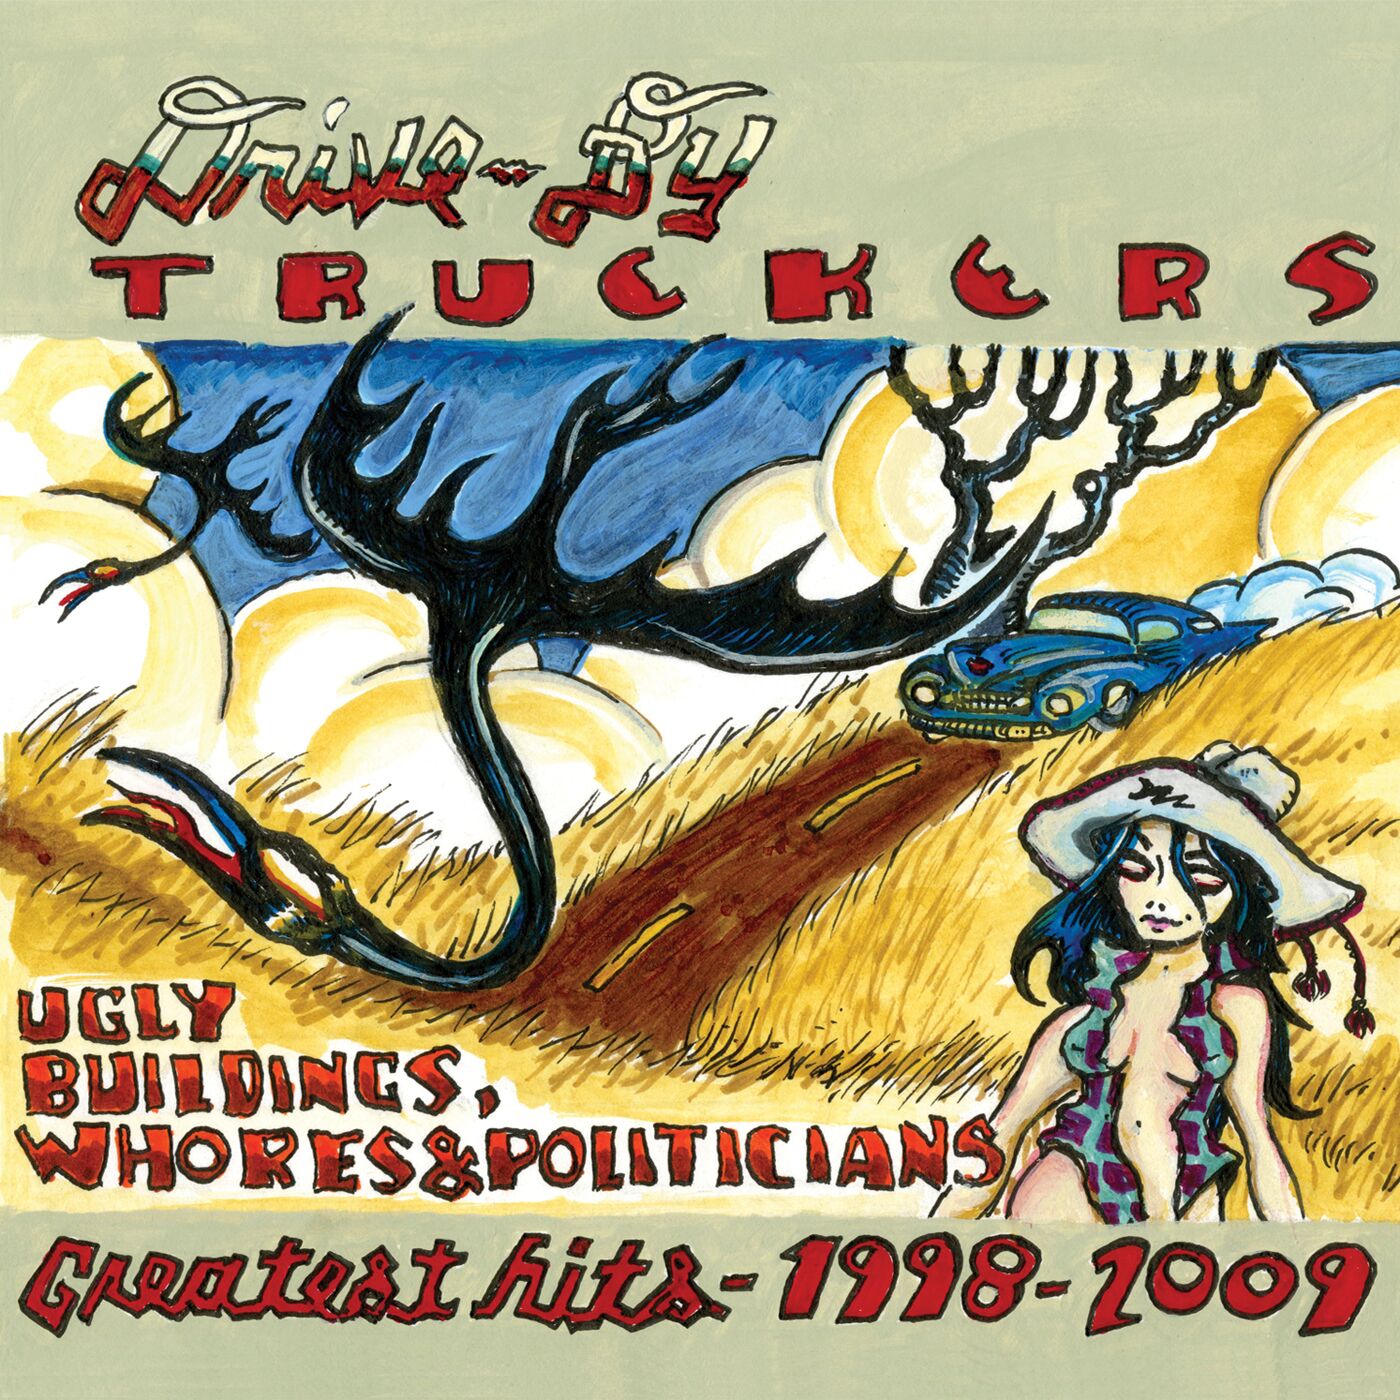 Drive-By Truckers - Greatest Hits 1998-2009 [Vinyl]